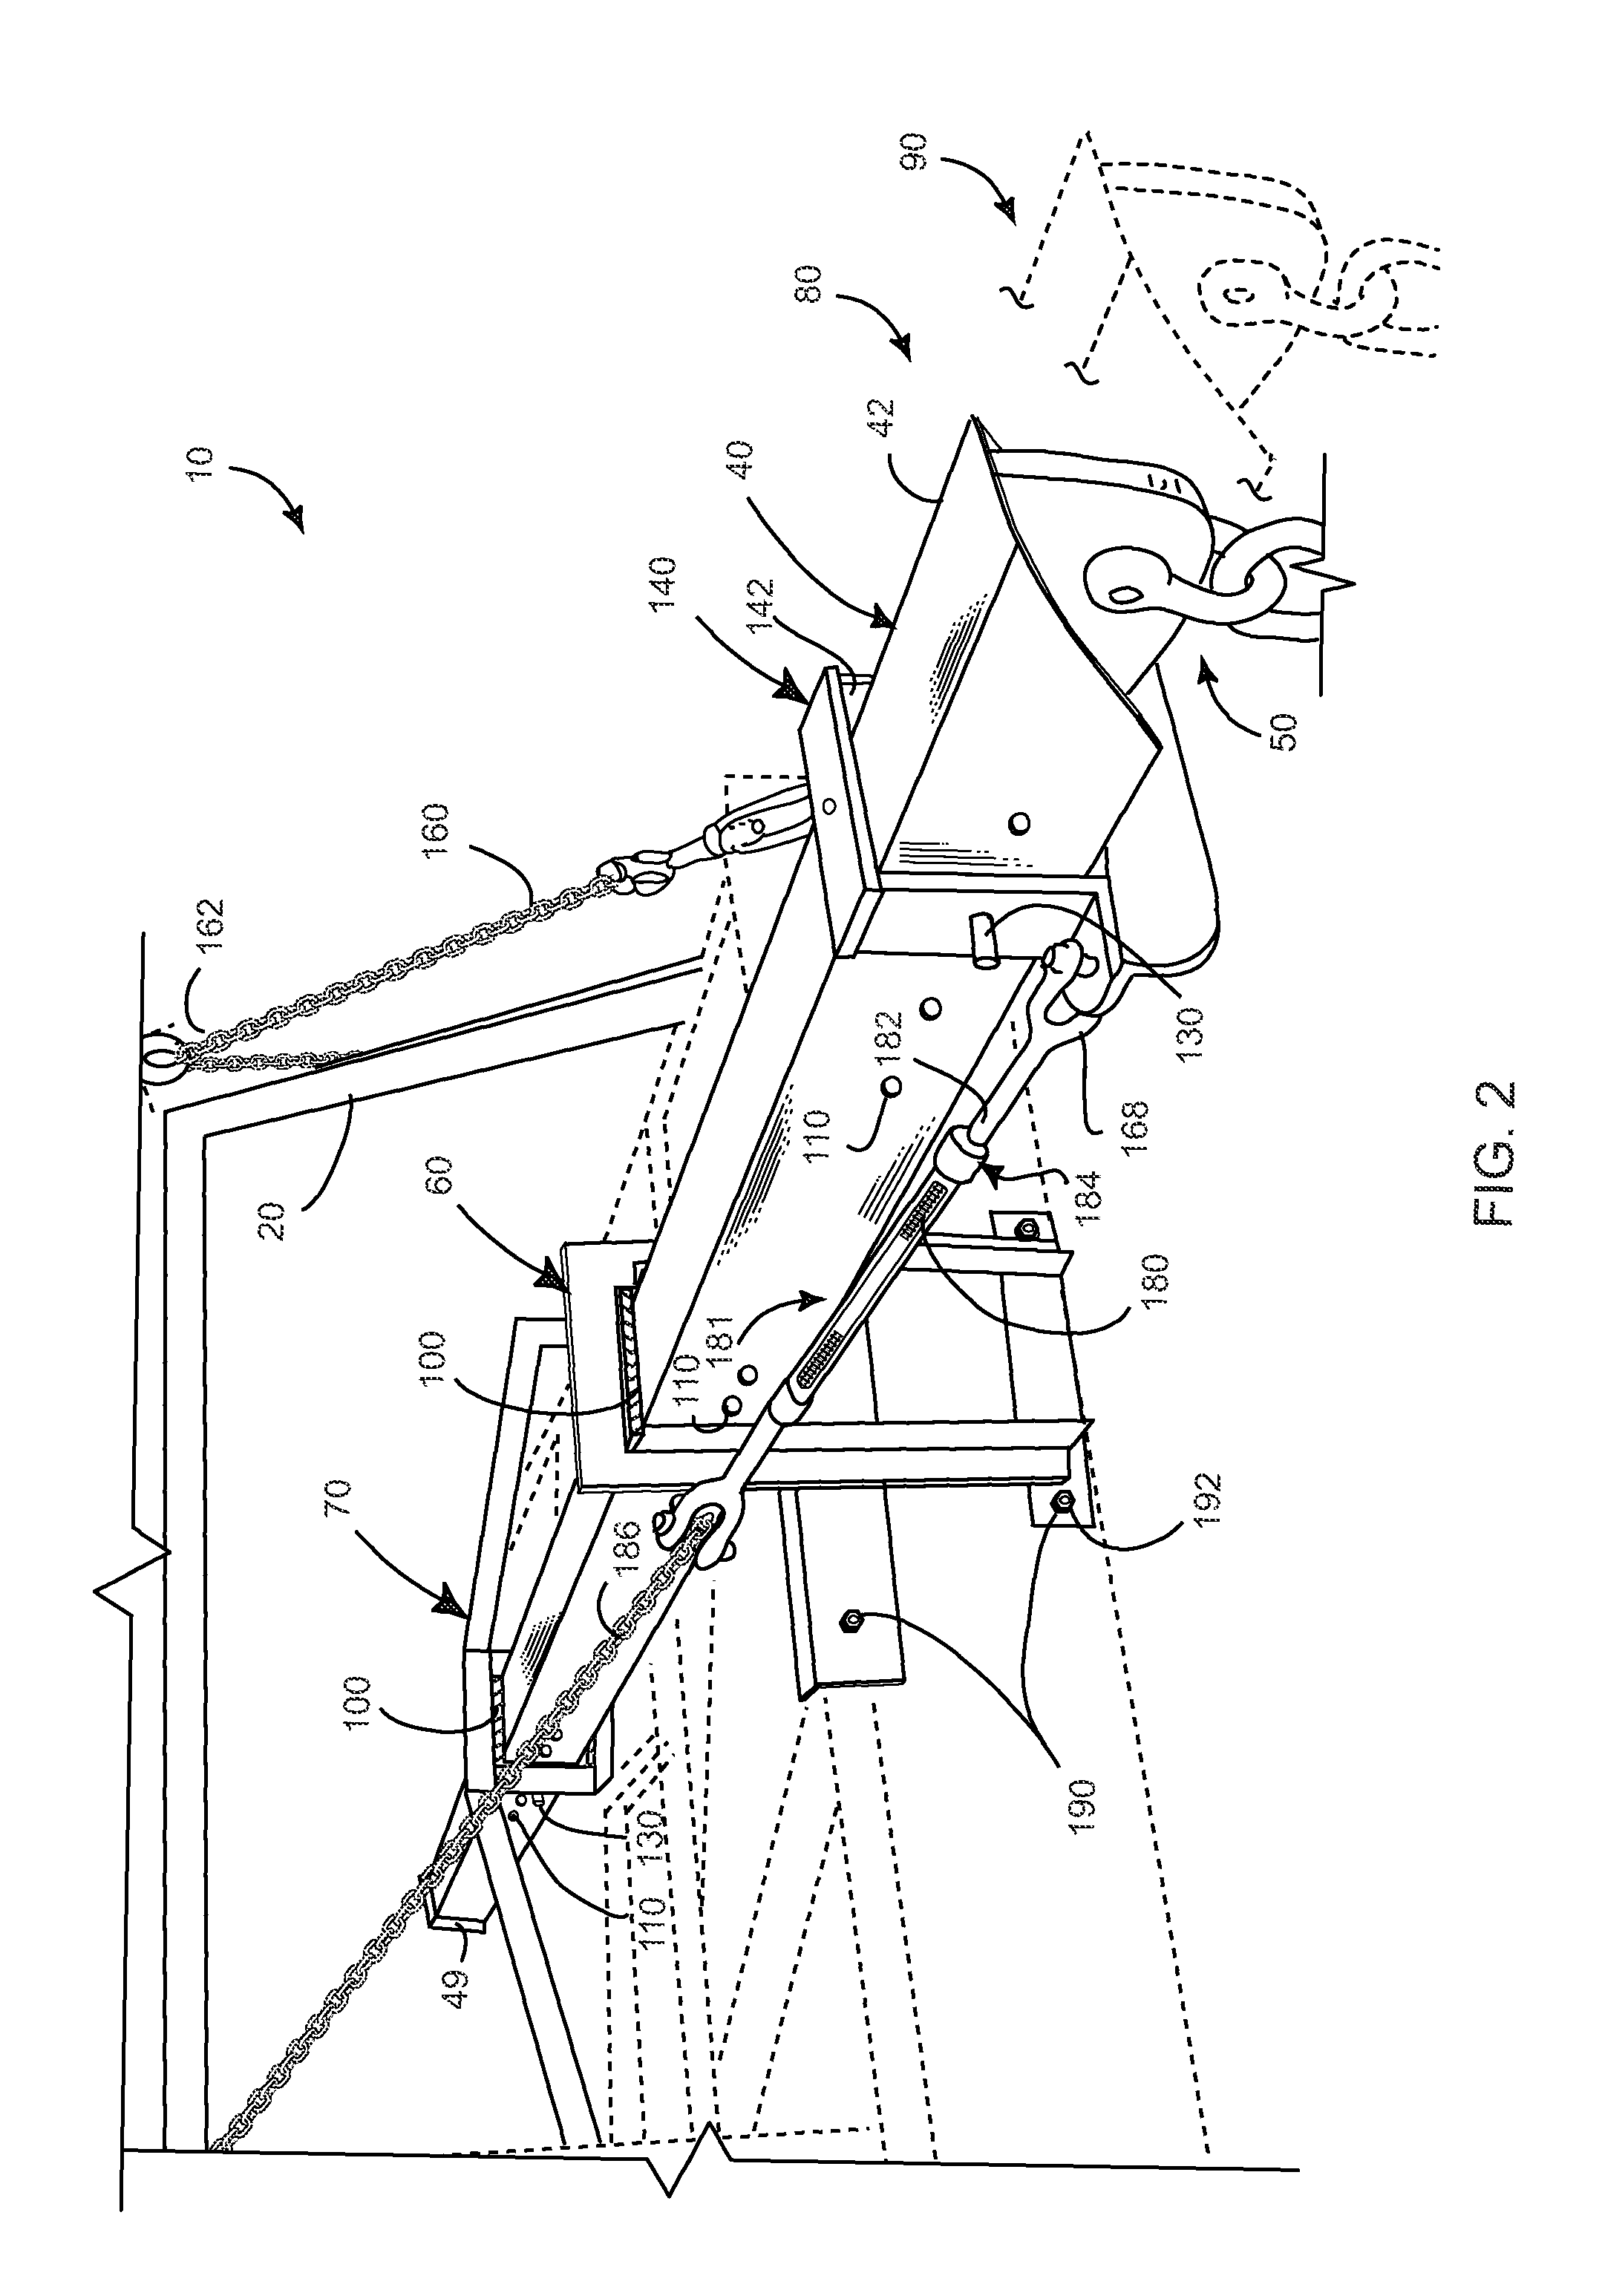 Apparatus and method for positioning an object in a building